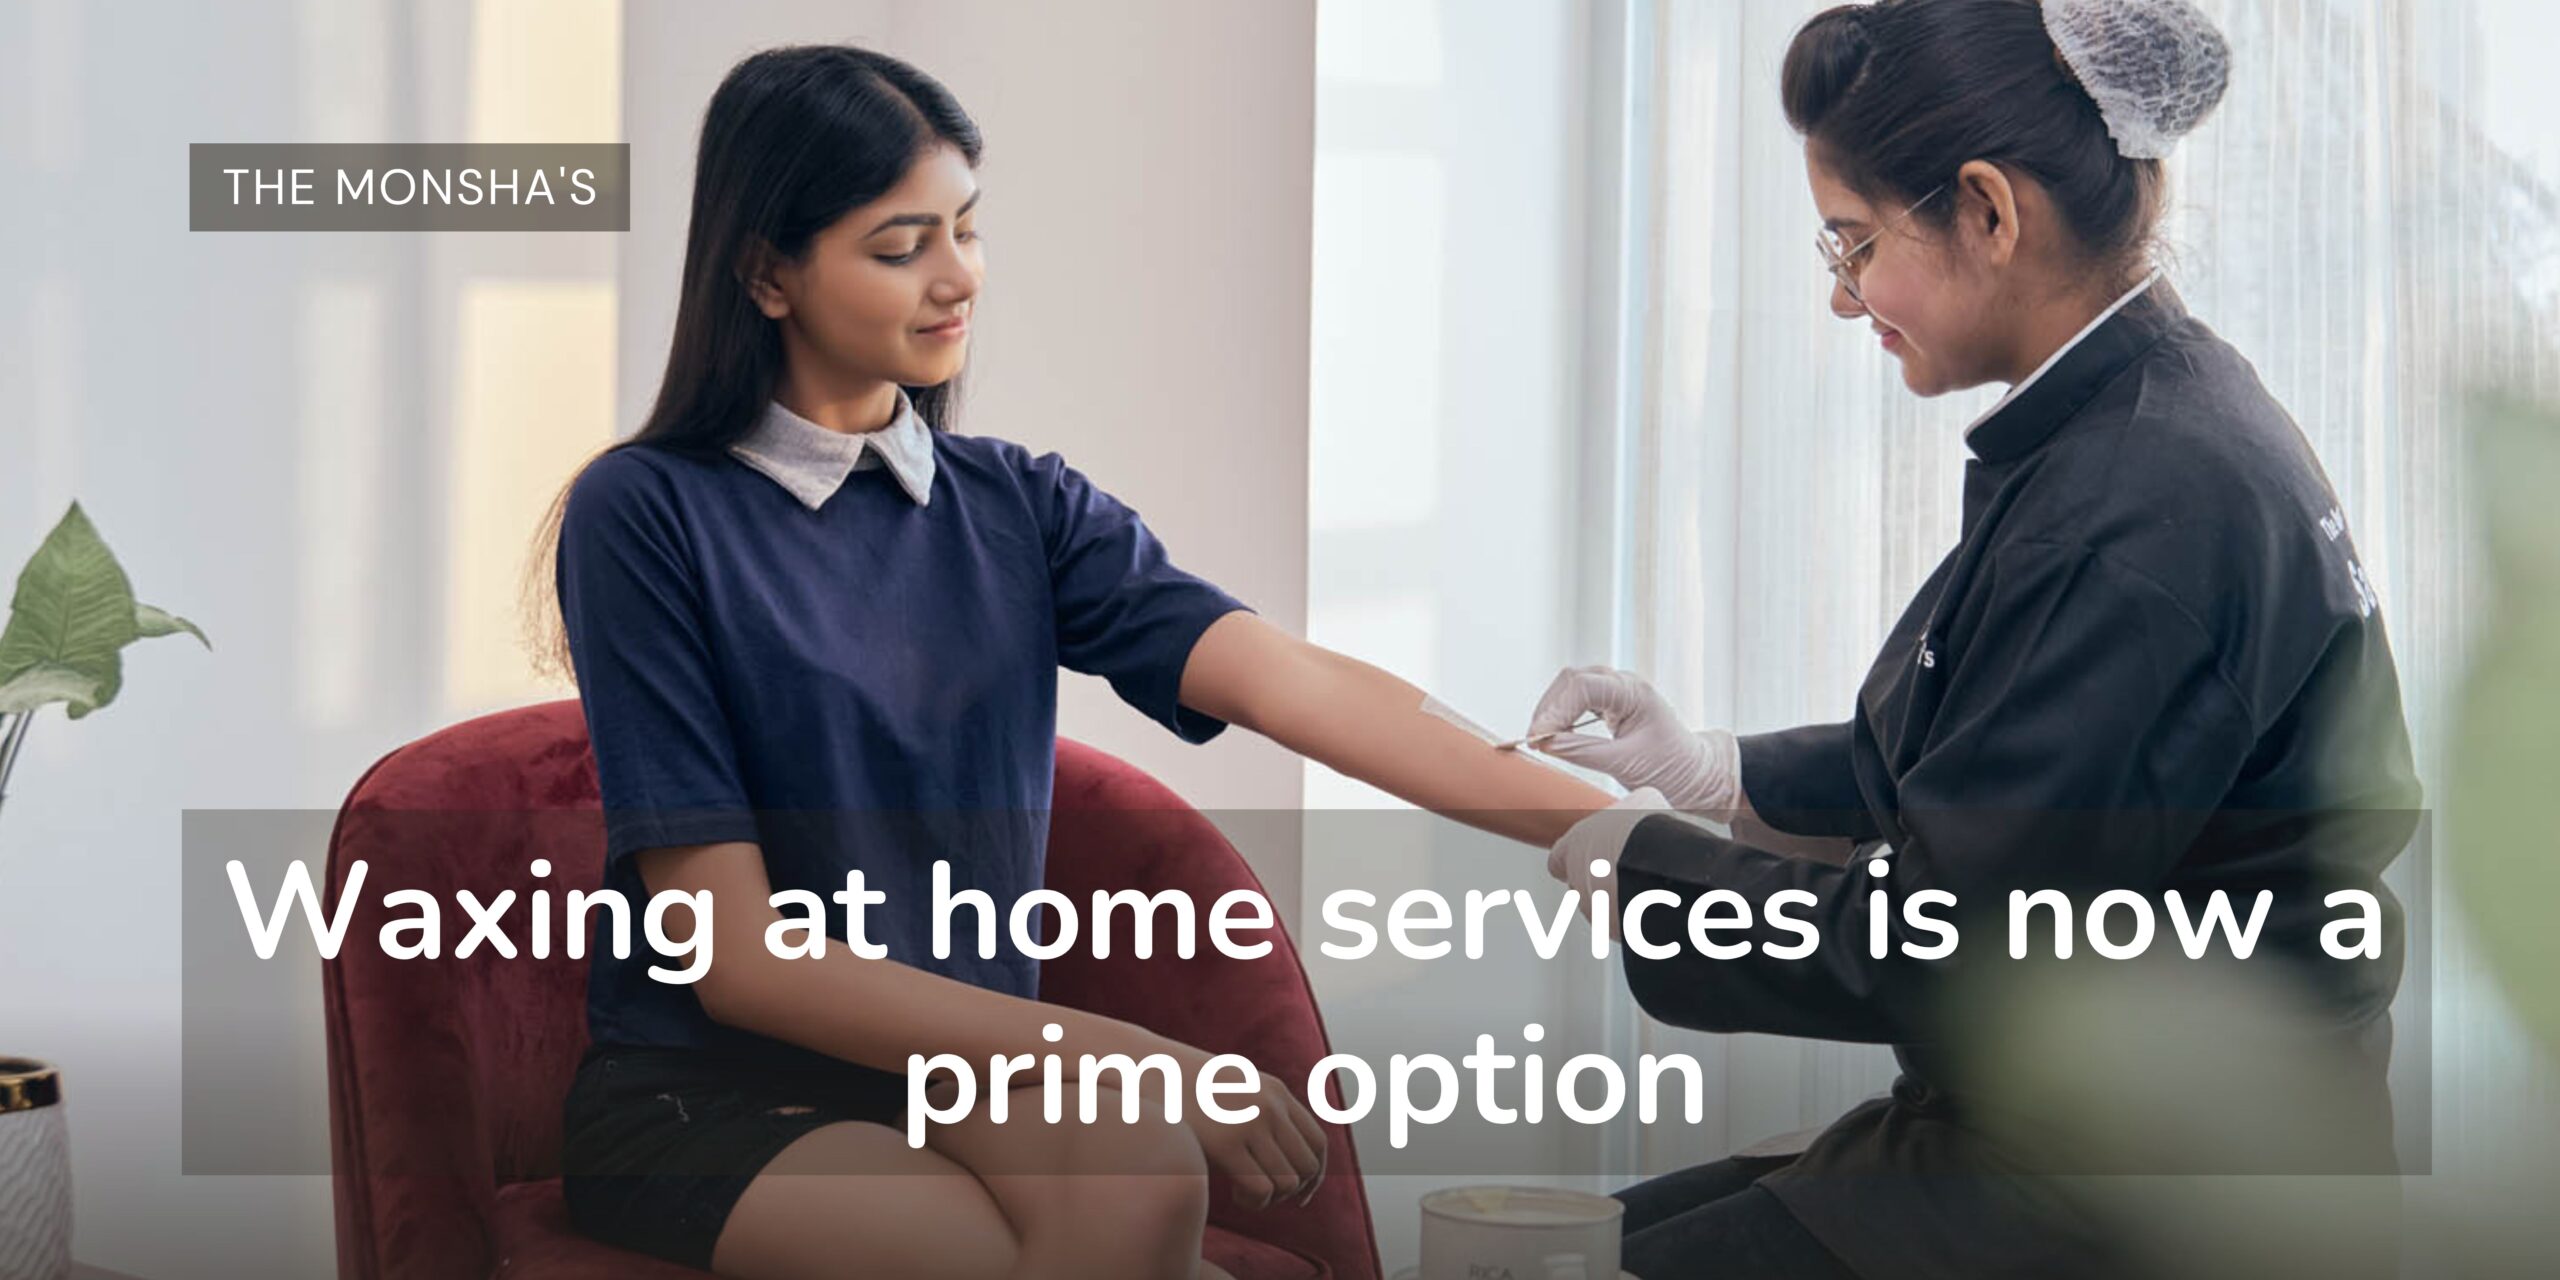 Waxing at home services is now a prime option